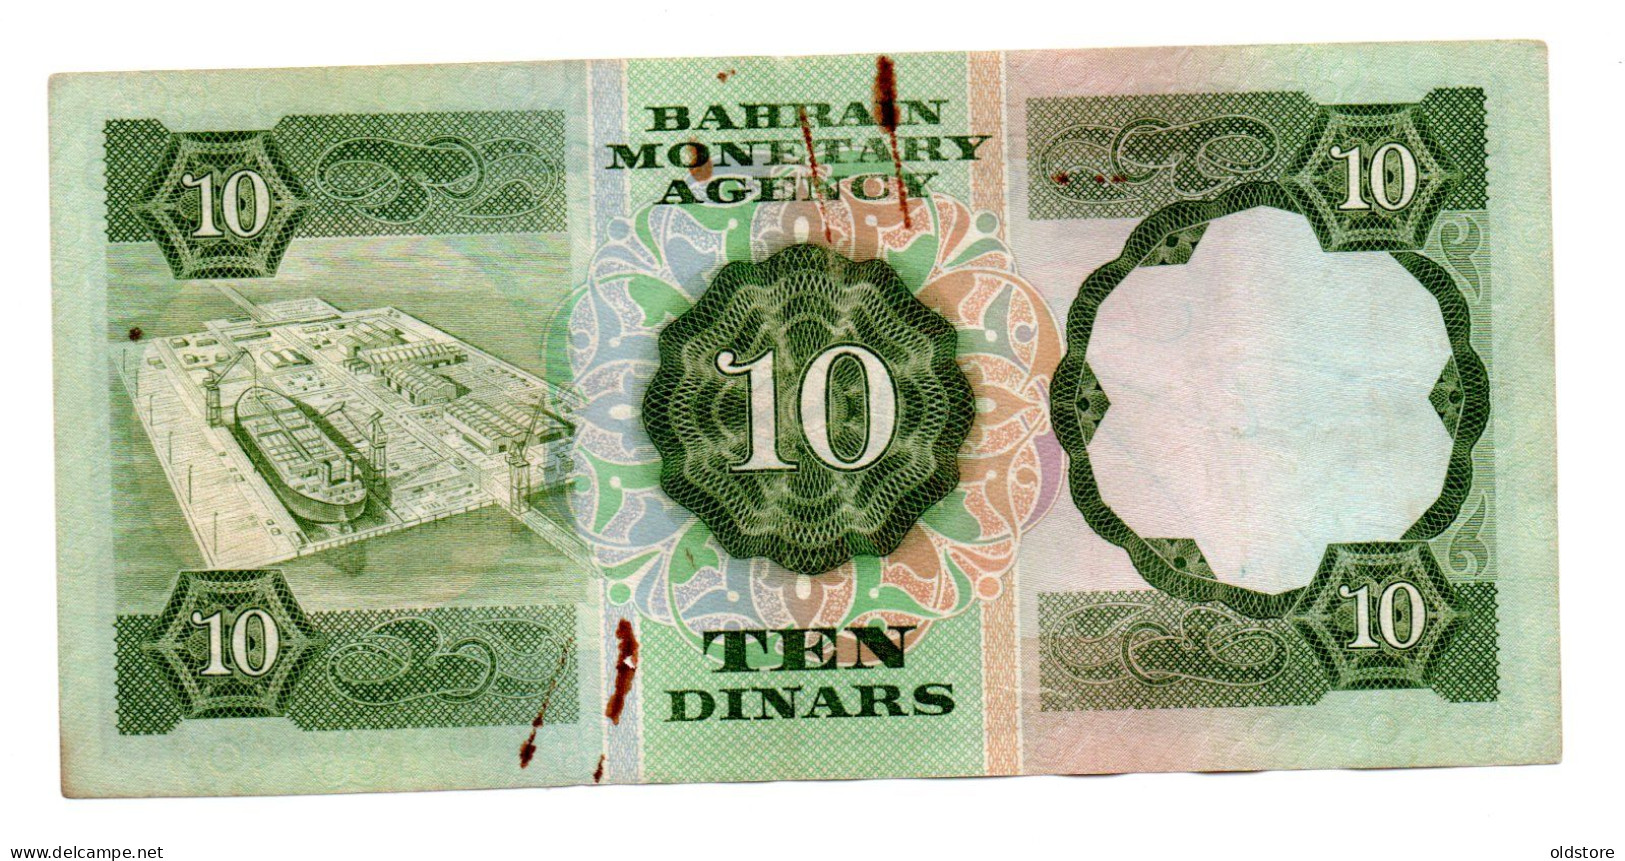 Bahrain Banknotes - 10 Dinars - Second Edition - ND 1973 - Used Condition - Bahrain